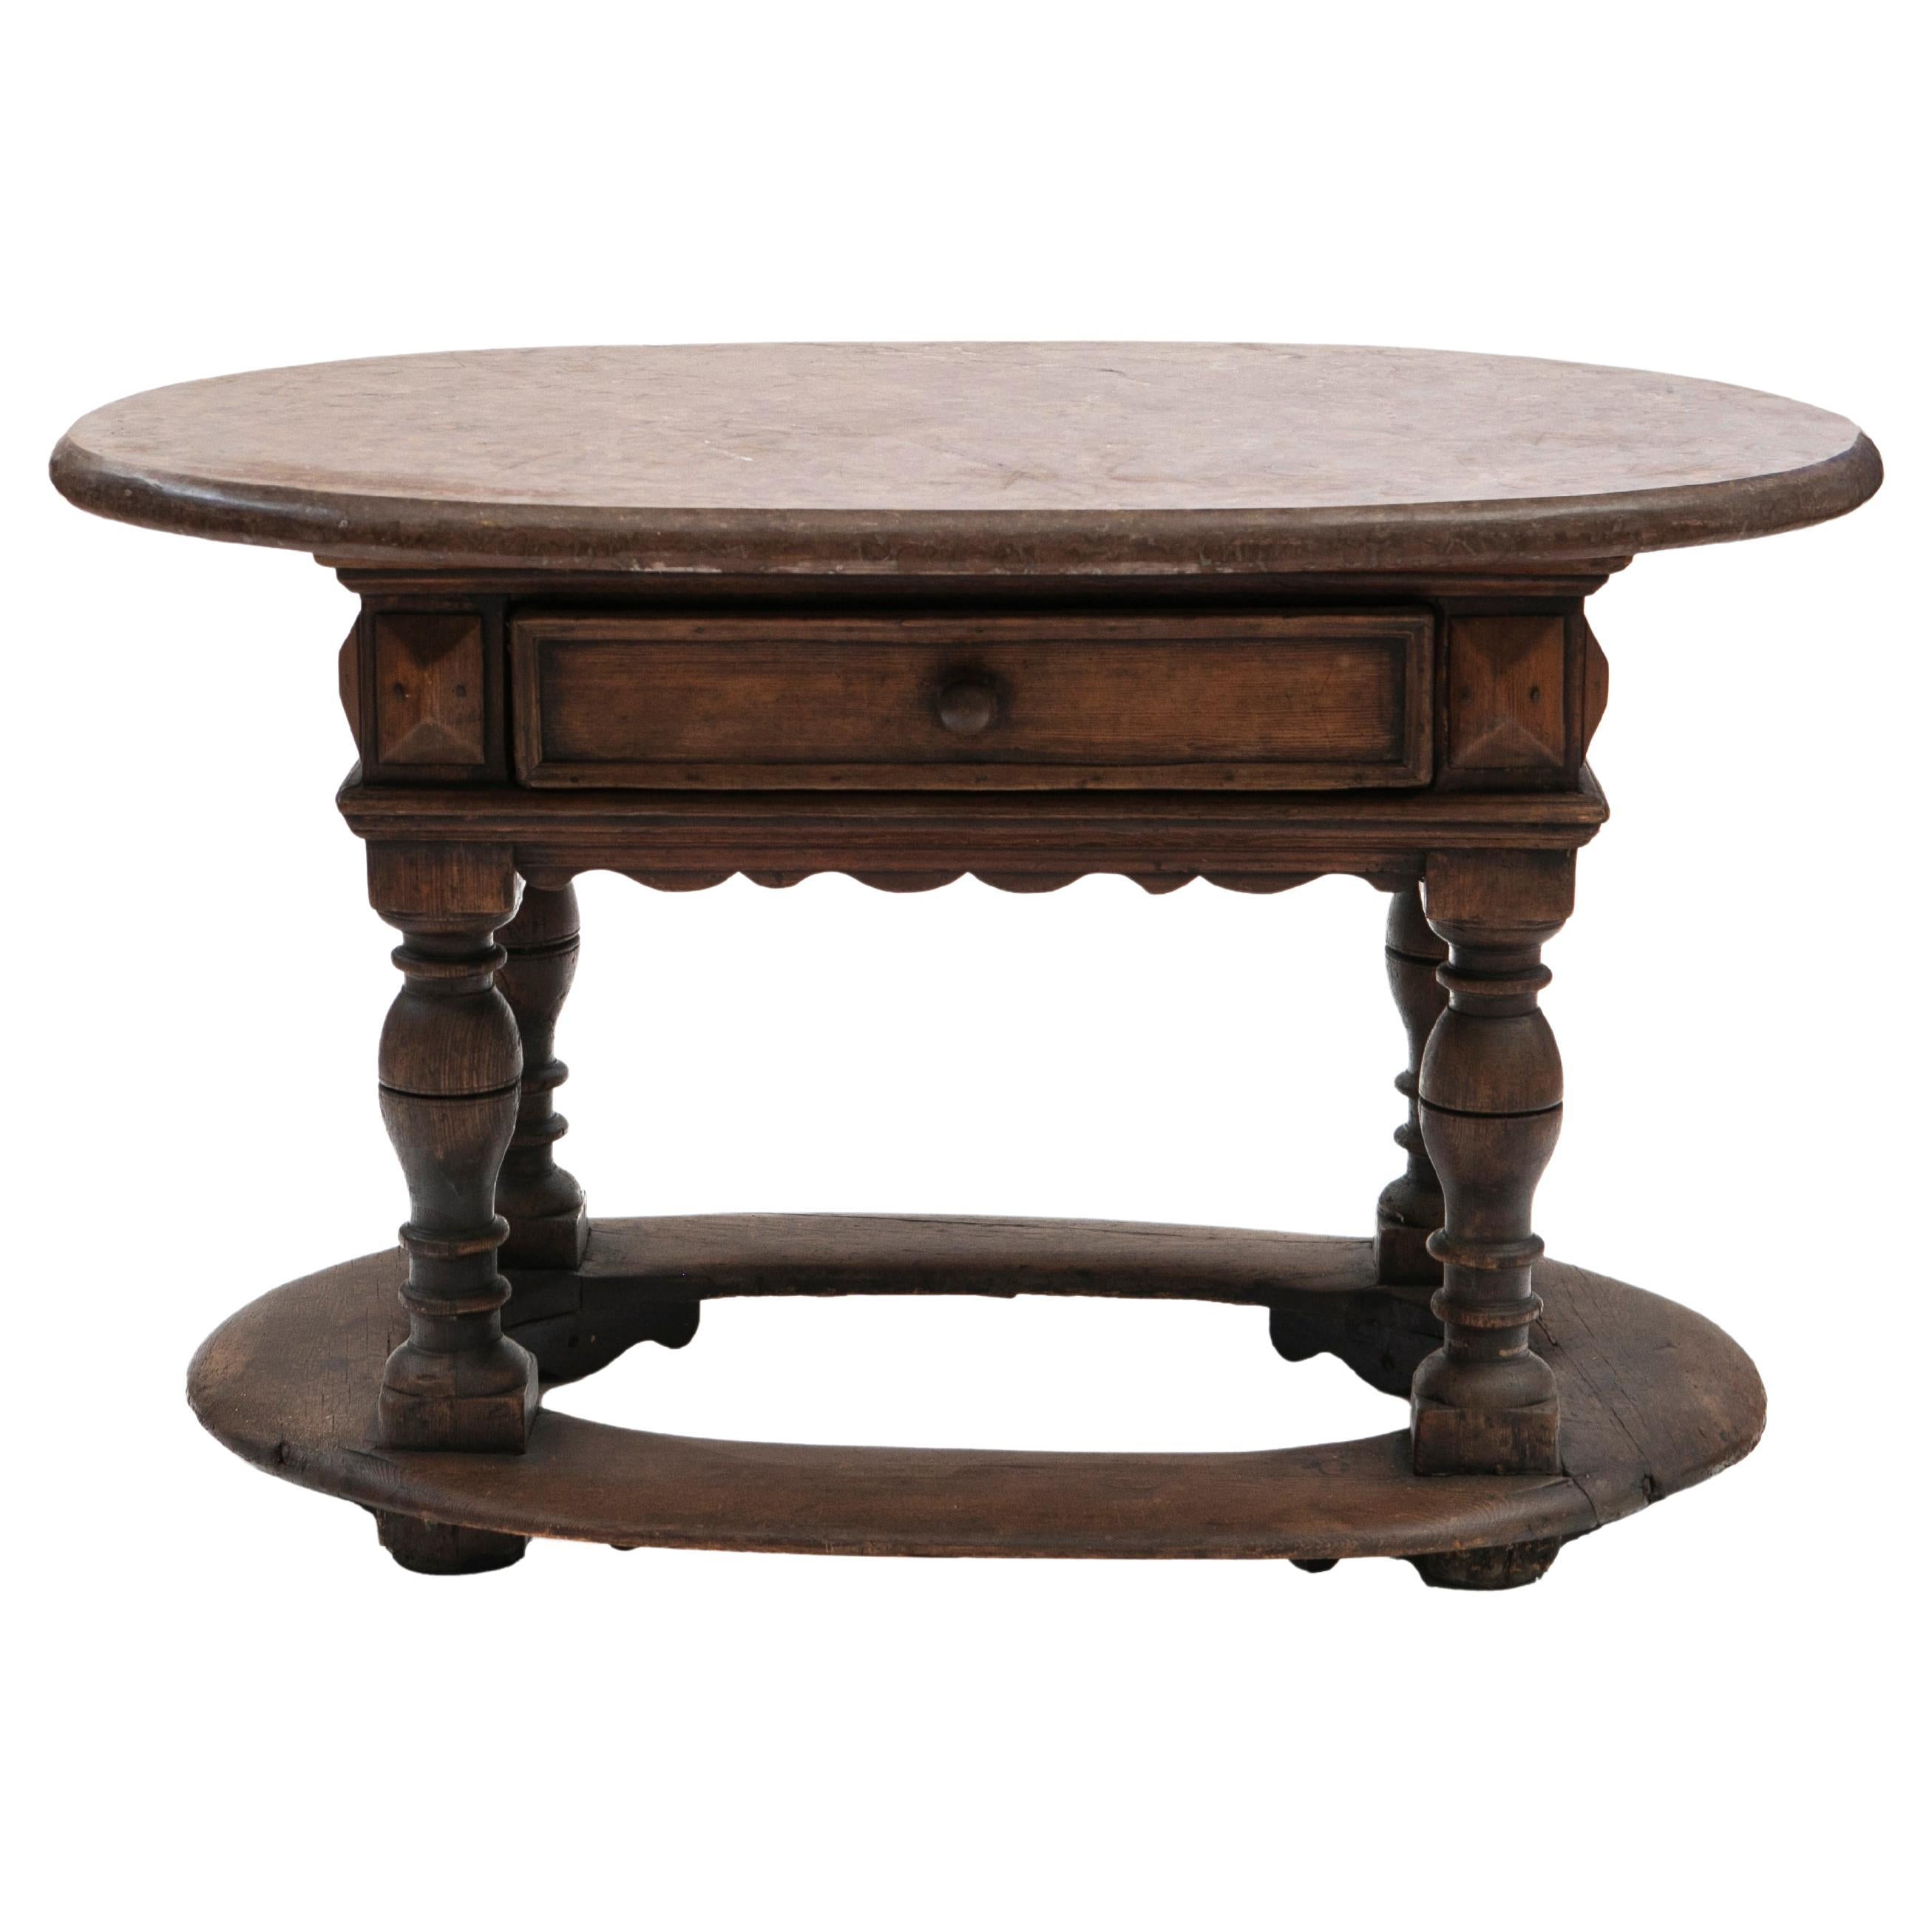 Oval Swedish Baroque Table / Center table. Oak with Fossil Limestone Top